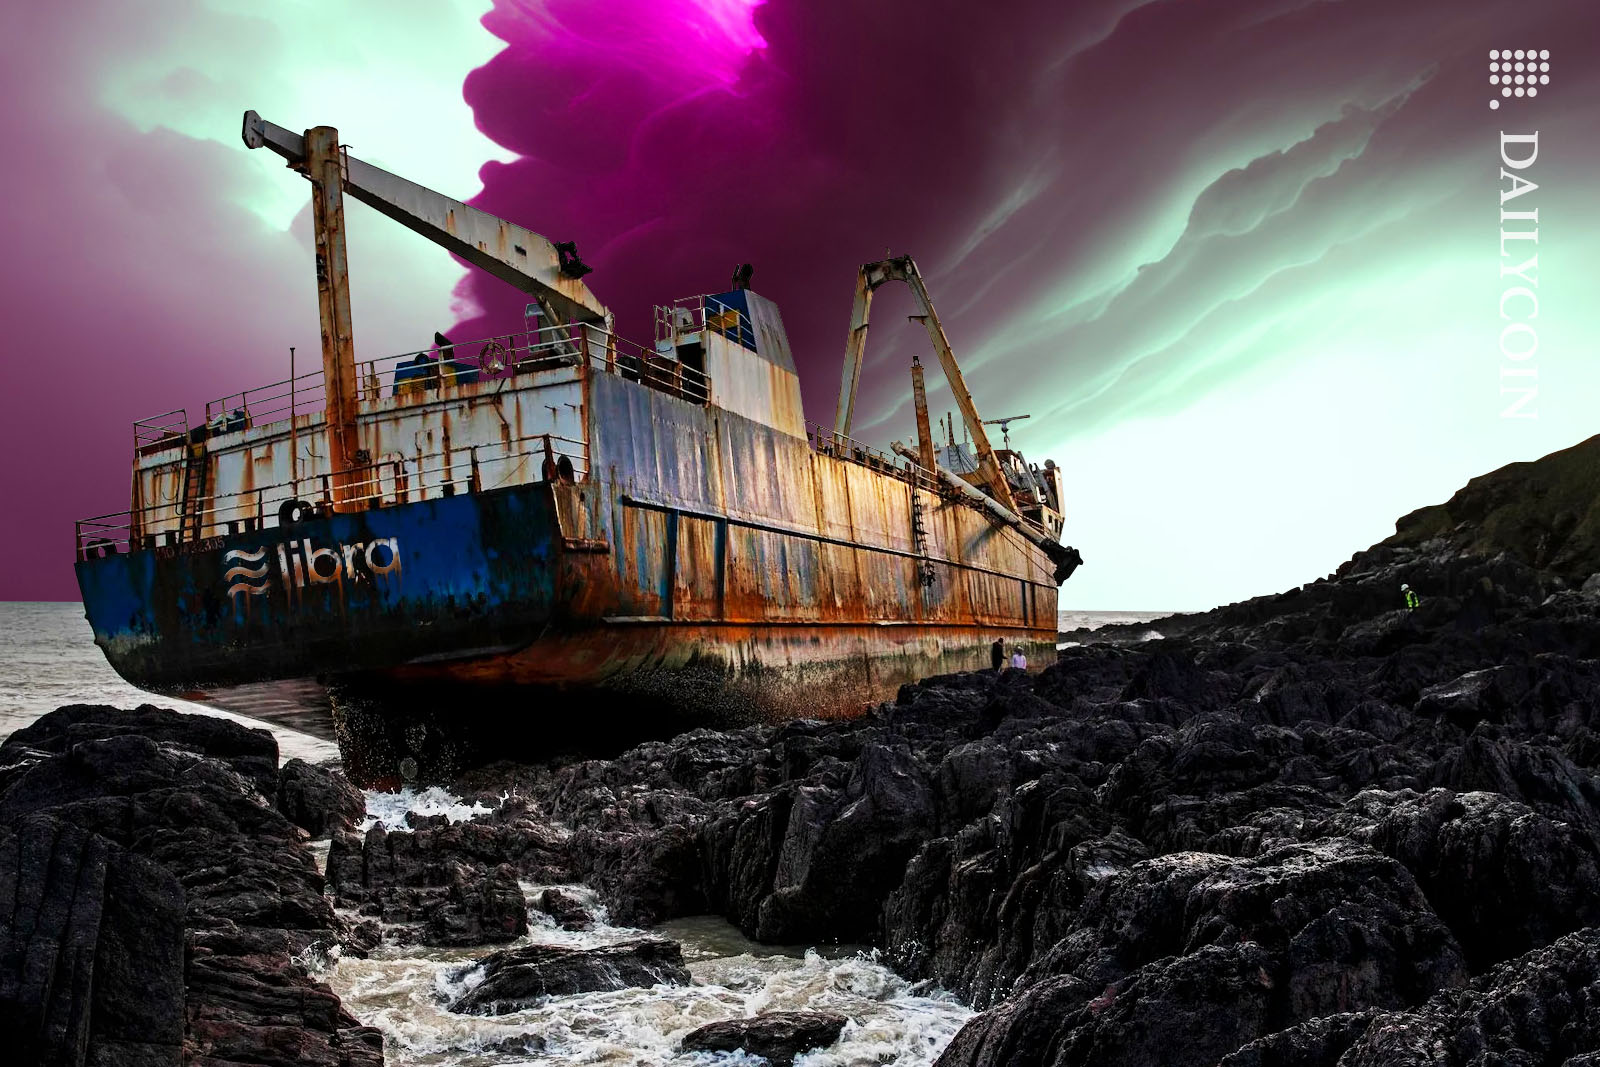 A ship called Libra abandoned, rusting away on the coast.